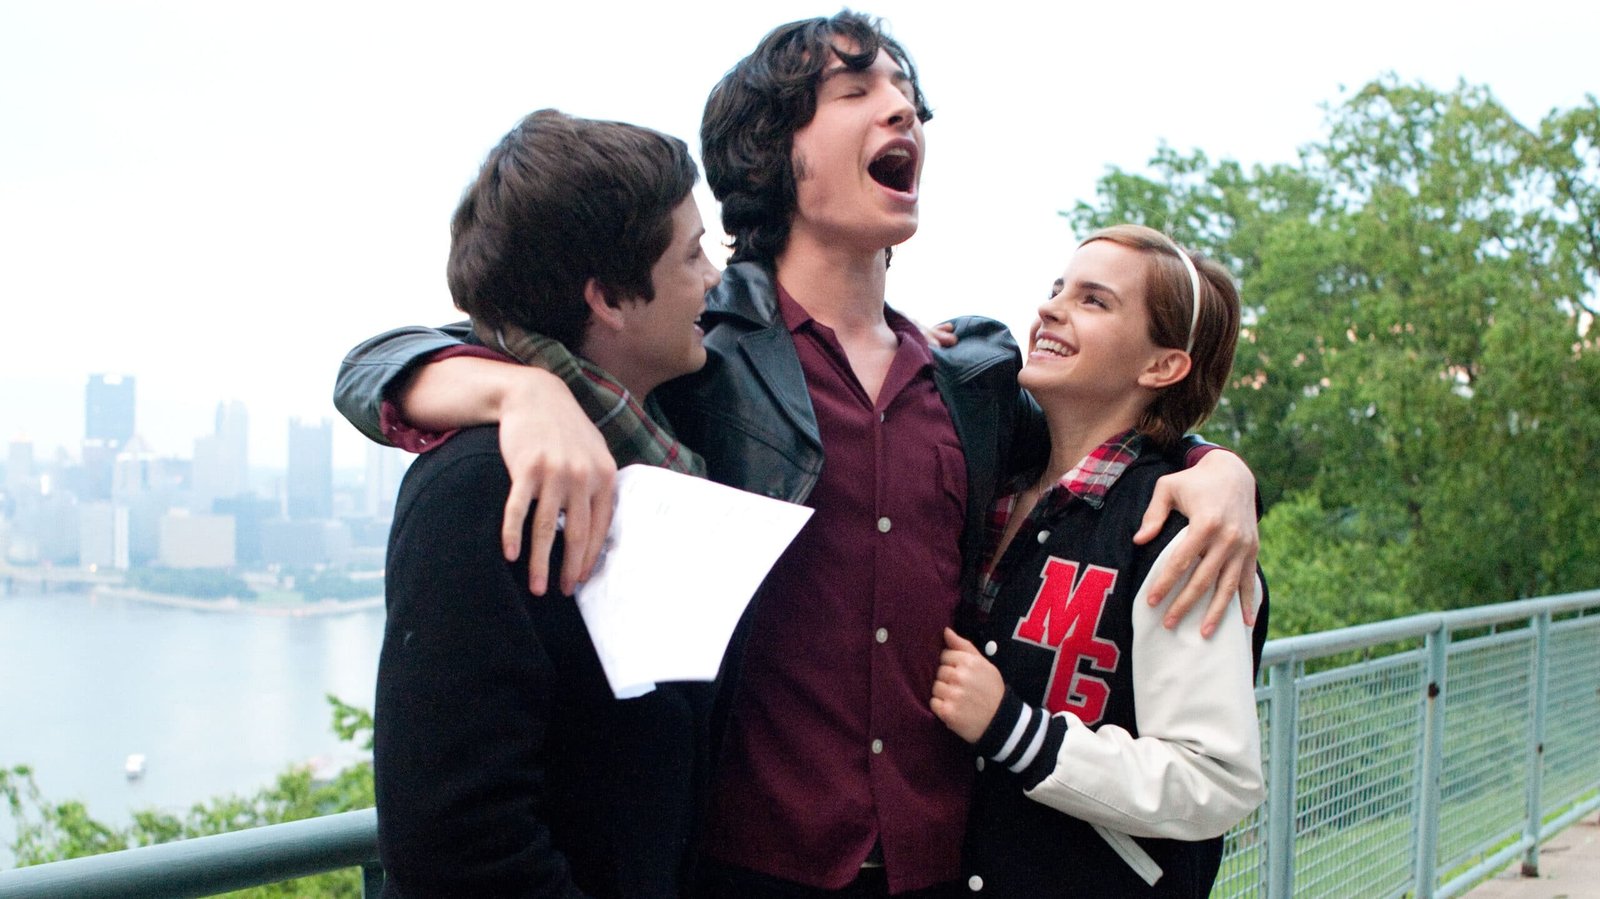 20 Remarkable quotes from The Perks Of Being A Wallflower